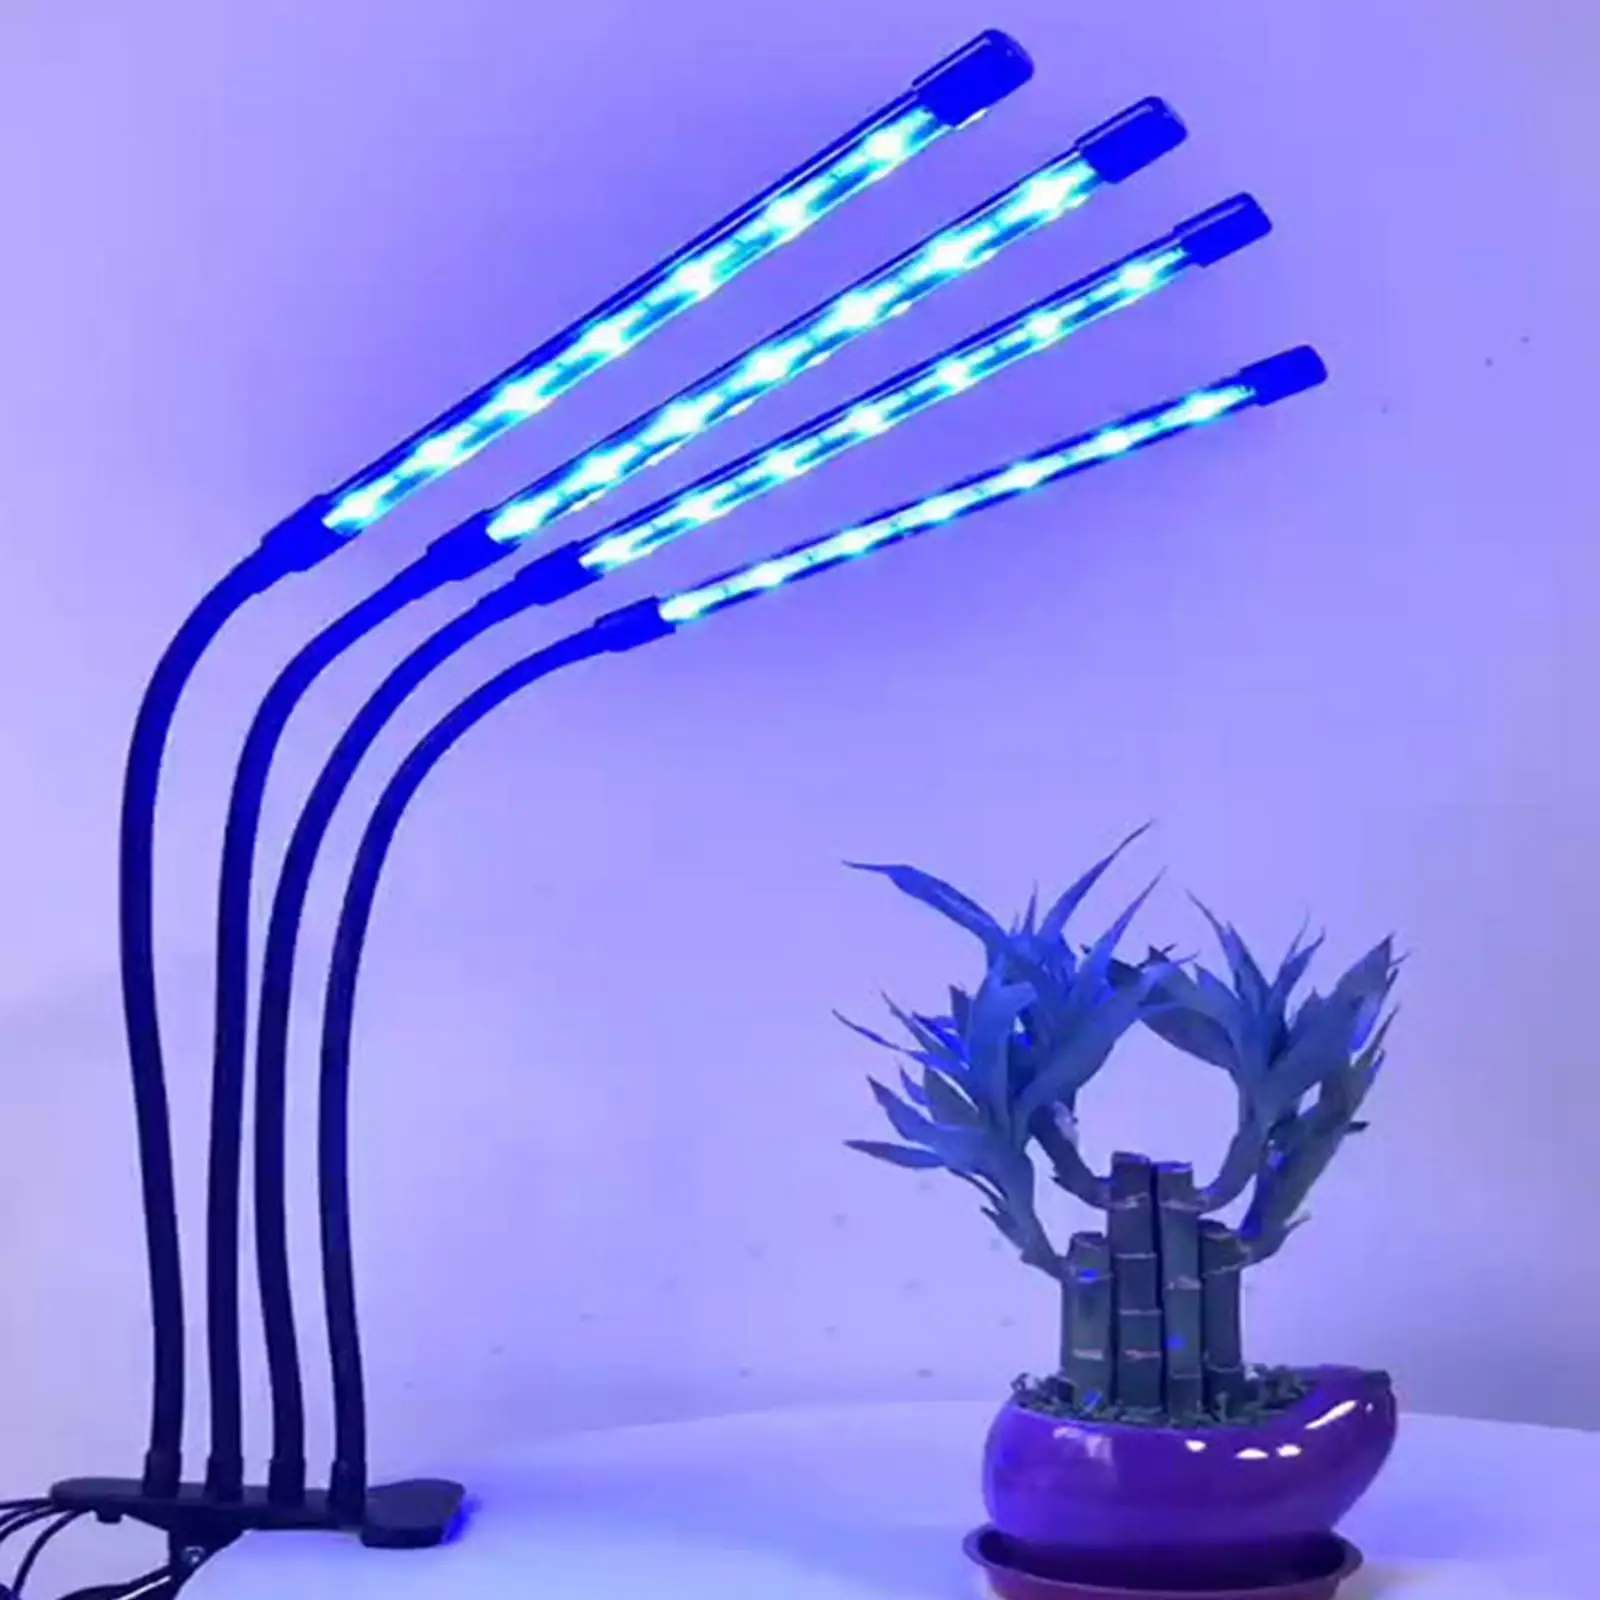 LED Grow Light Auto Off Timing 3 9 12Hrs Plants Growth Lamp for Seedling Planting Cultivation Vegetable Gardening Greenhouse